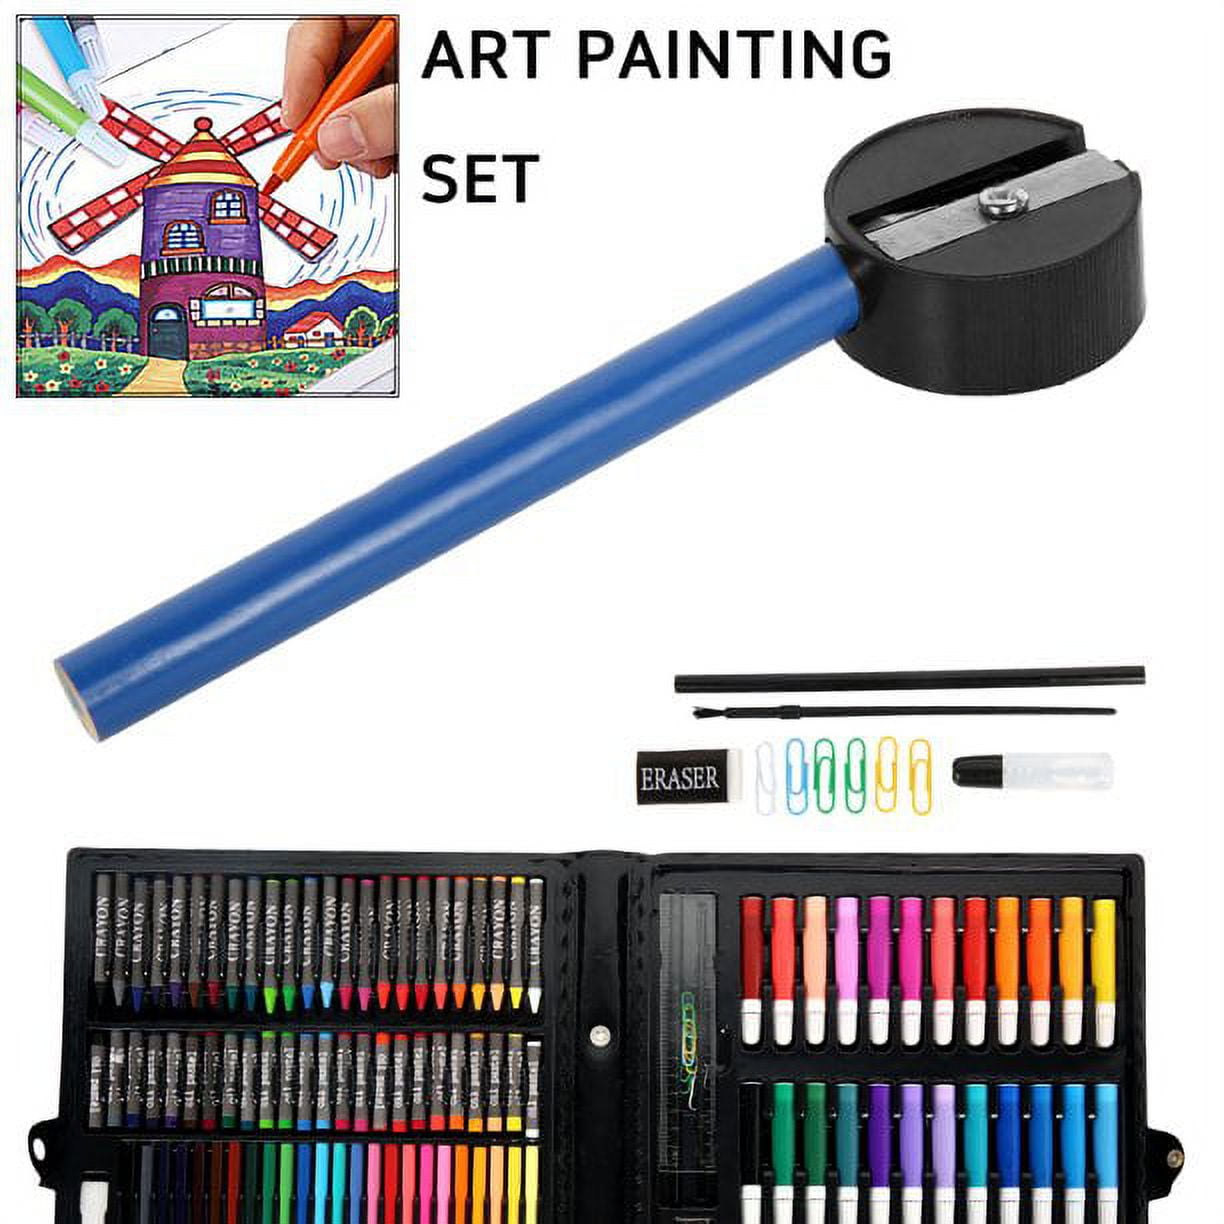 150 Piece Deluxe Art Set, Casewin Art Supplies for Drawing, Painting and  More, Kid Crafting Supplies Great for Teenage 4 5 6 7 8 9 10 11 12 13 Years